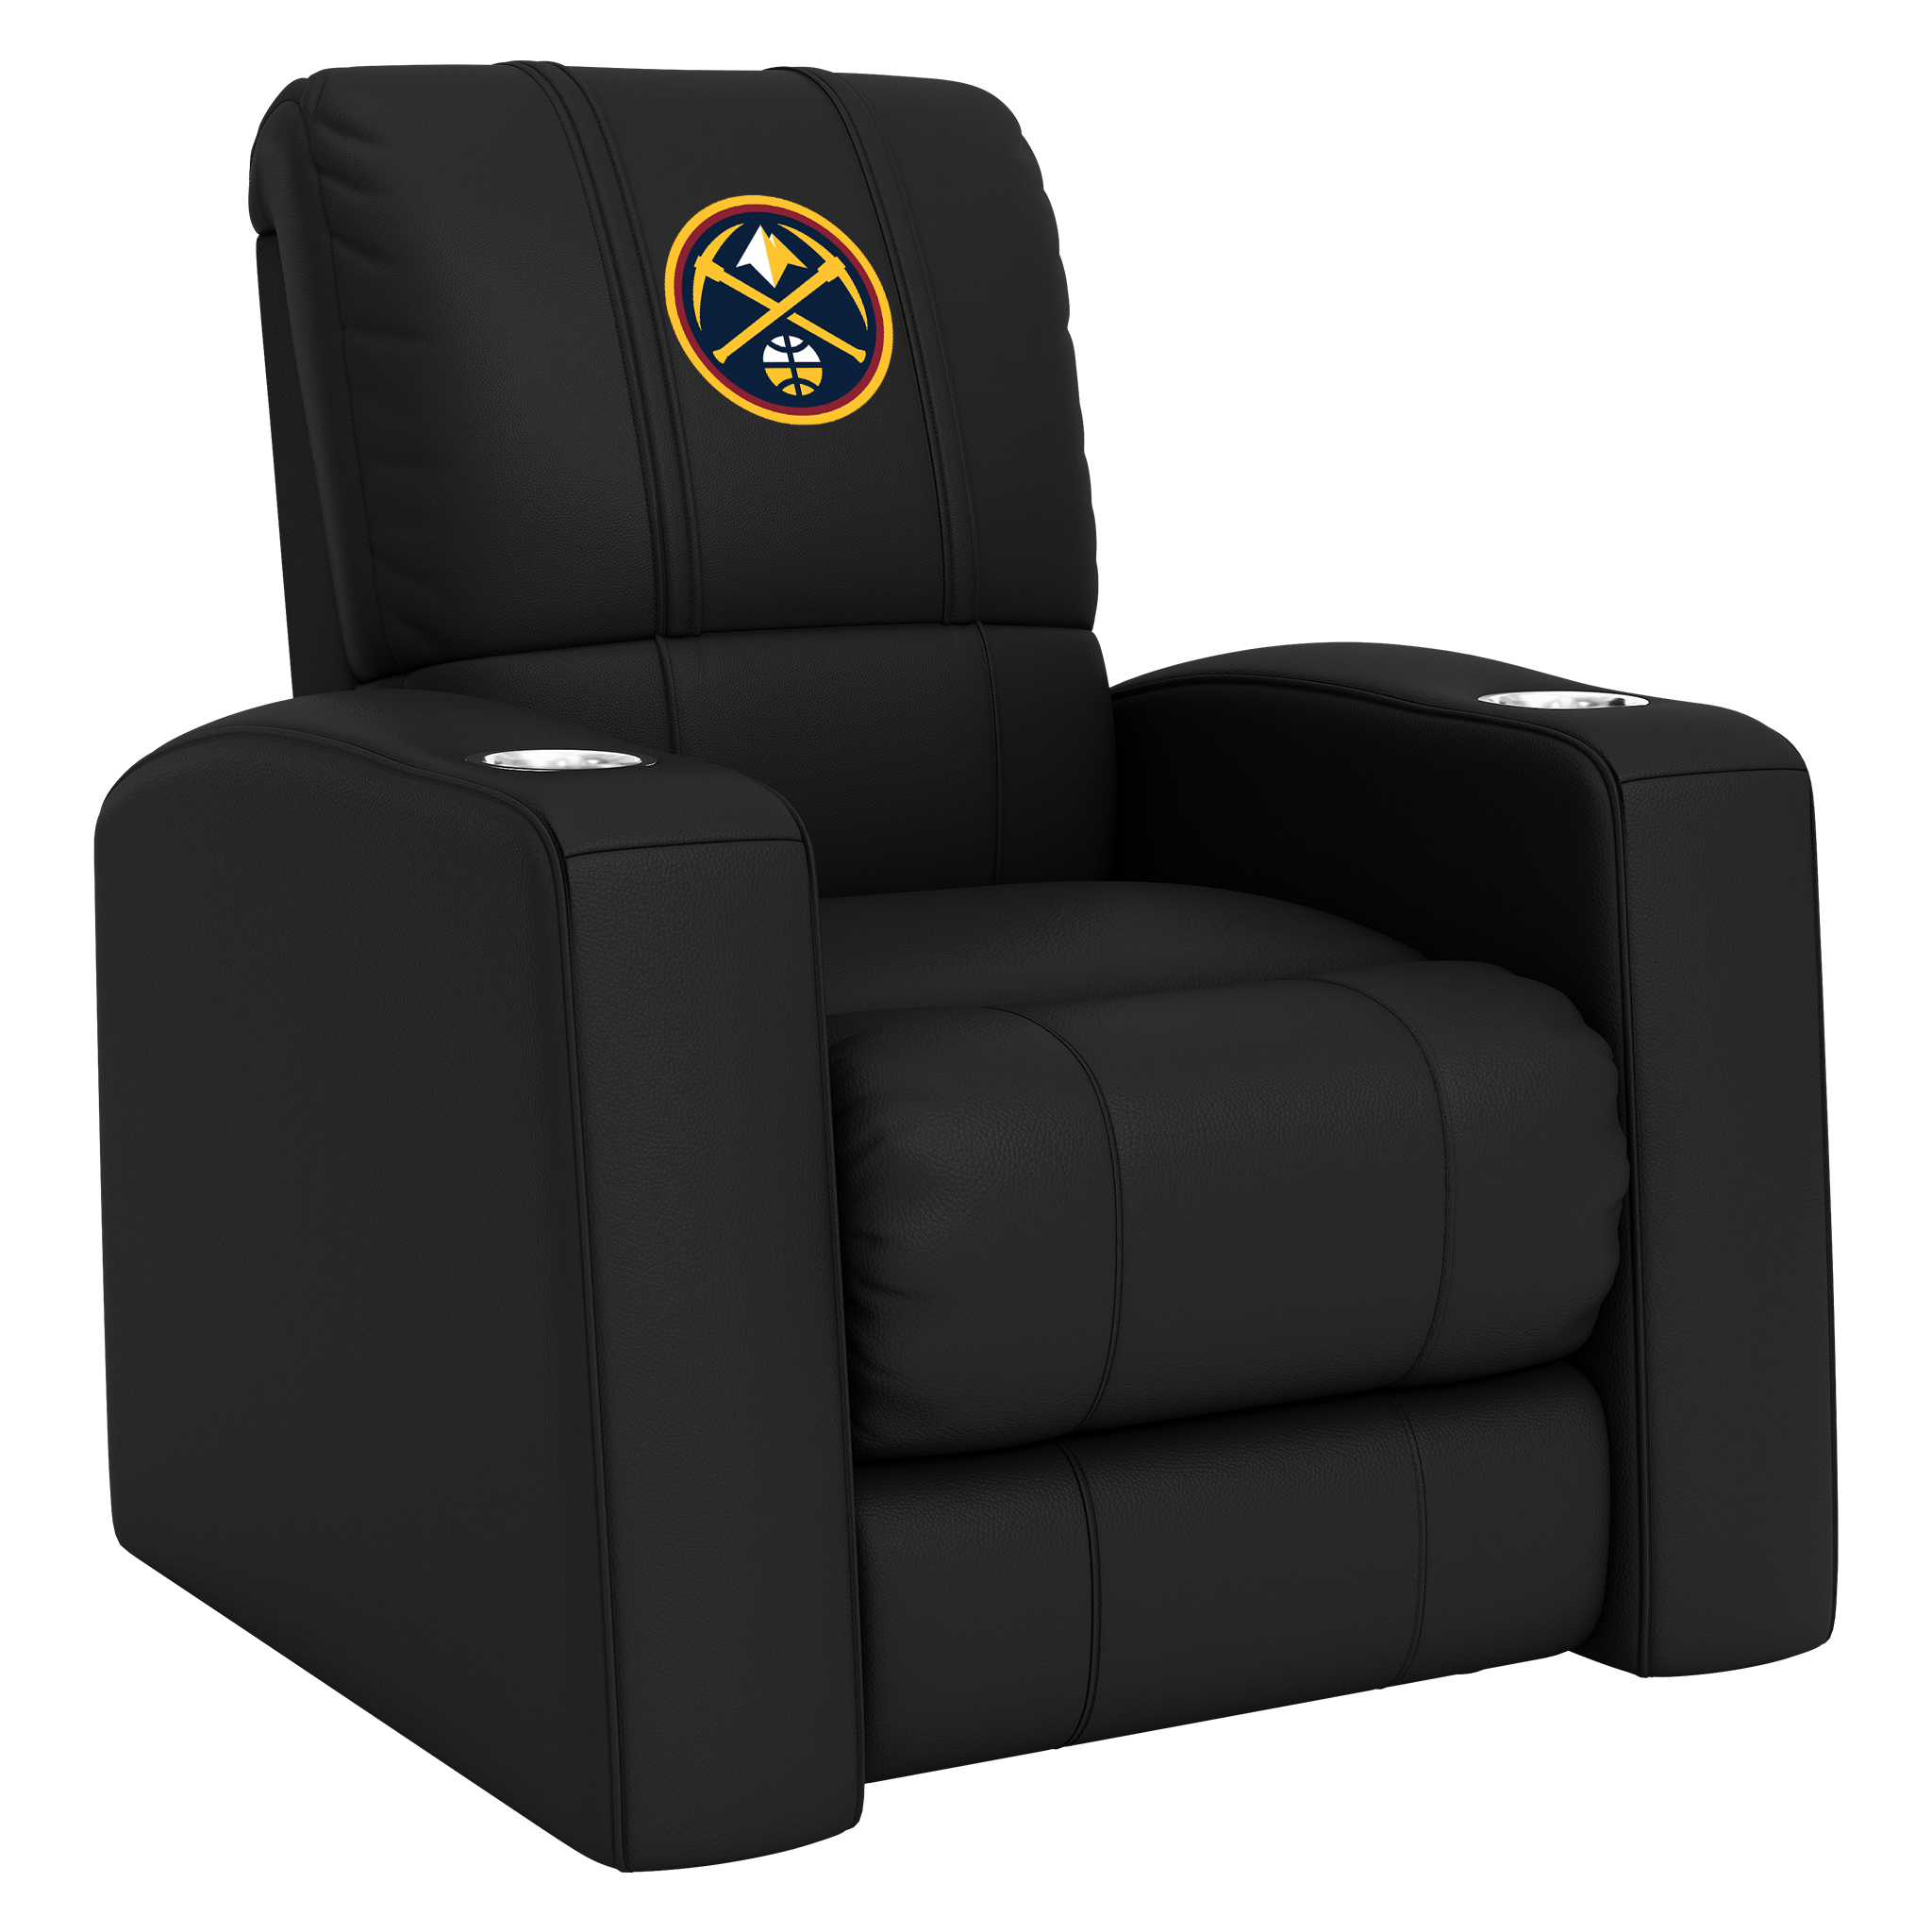 Denver Nuggets Home Theater Recliner with Denver Nuggets Logo